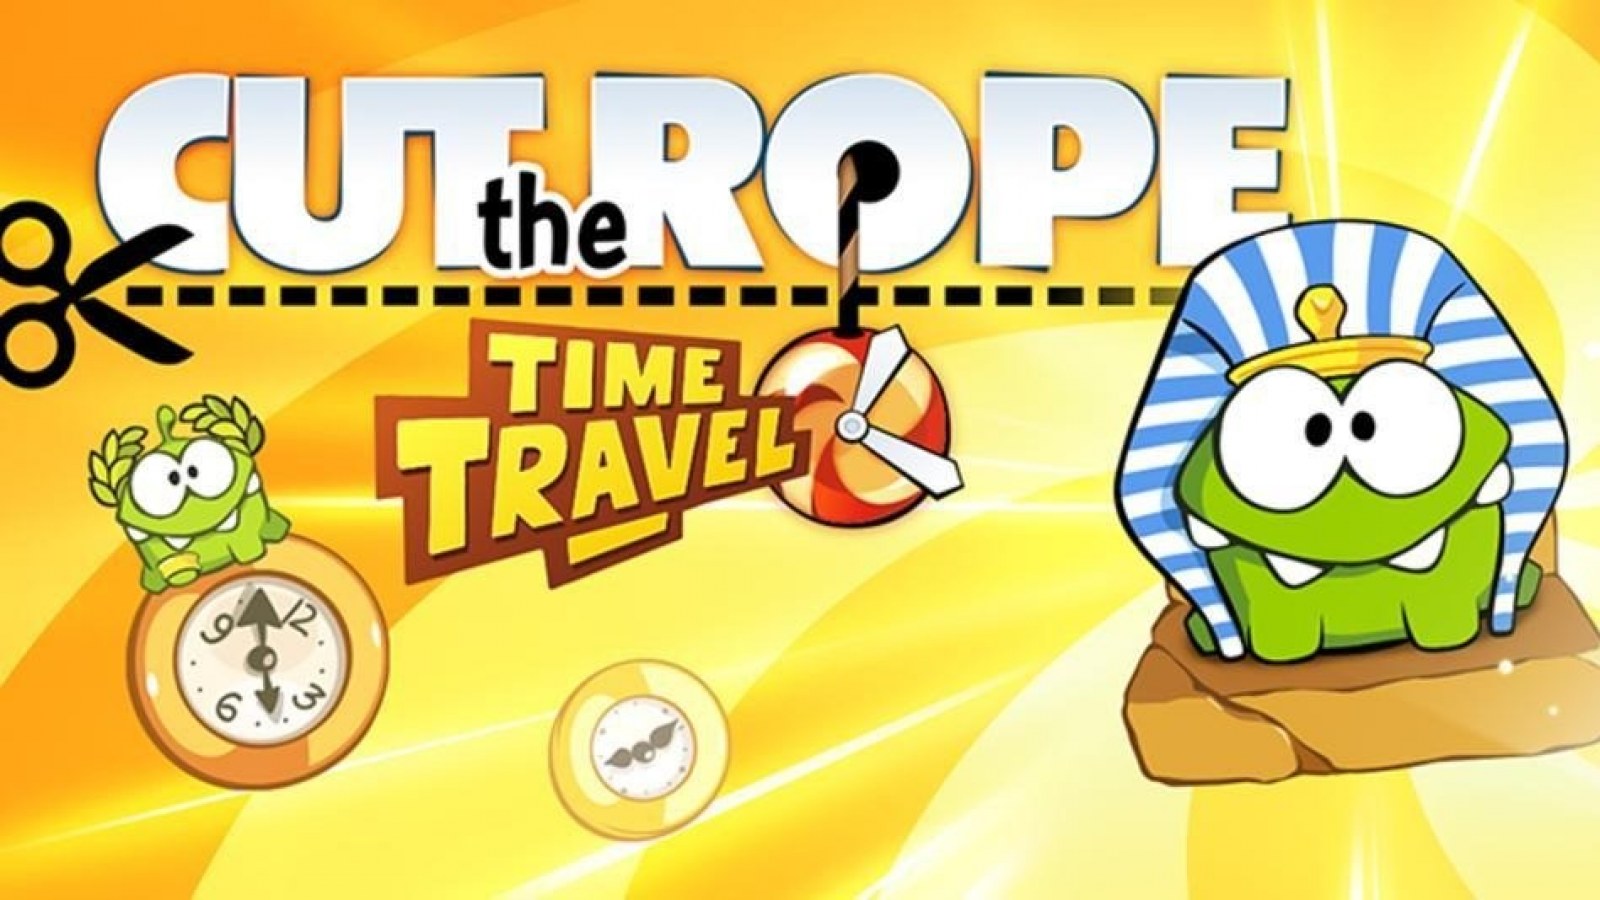 Cut the Rope 2 Hits Google Play, Help Om Nom Through New Worlds (Updated)